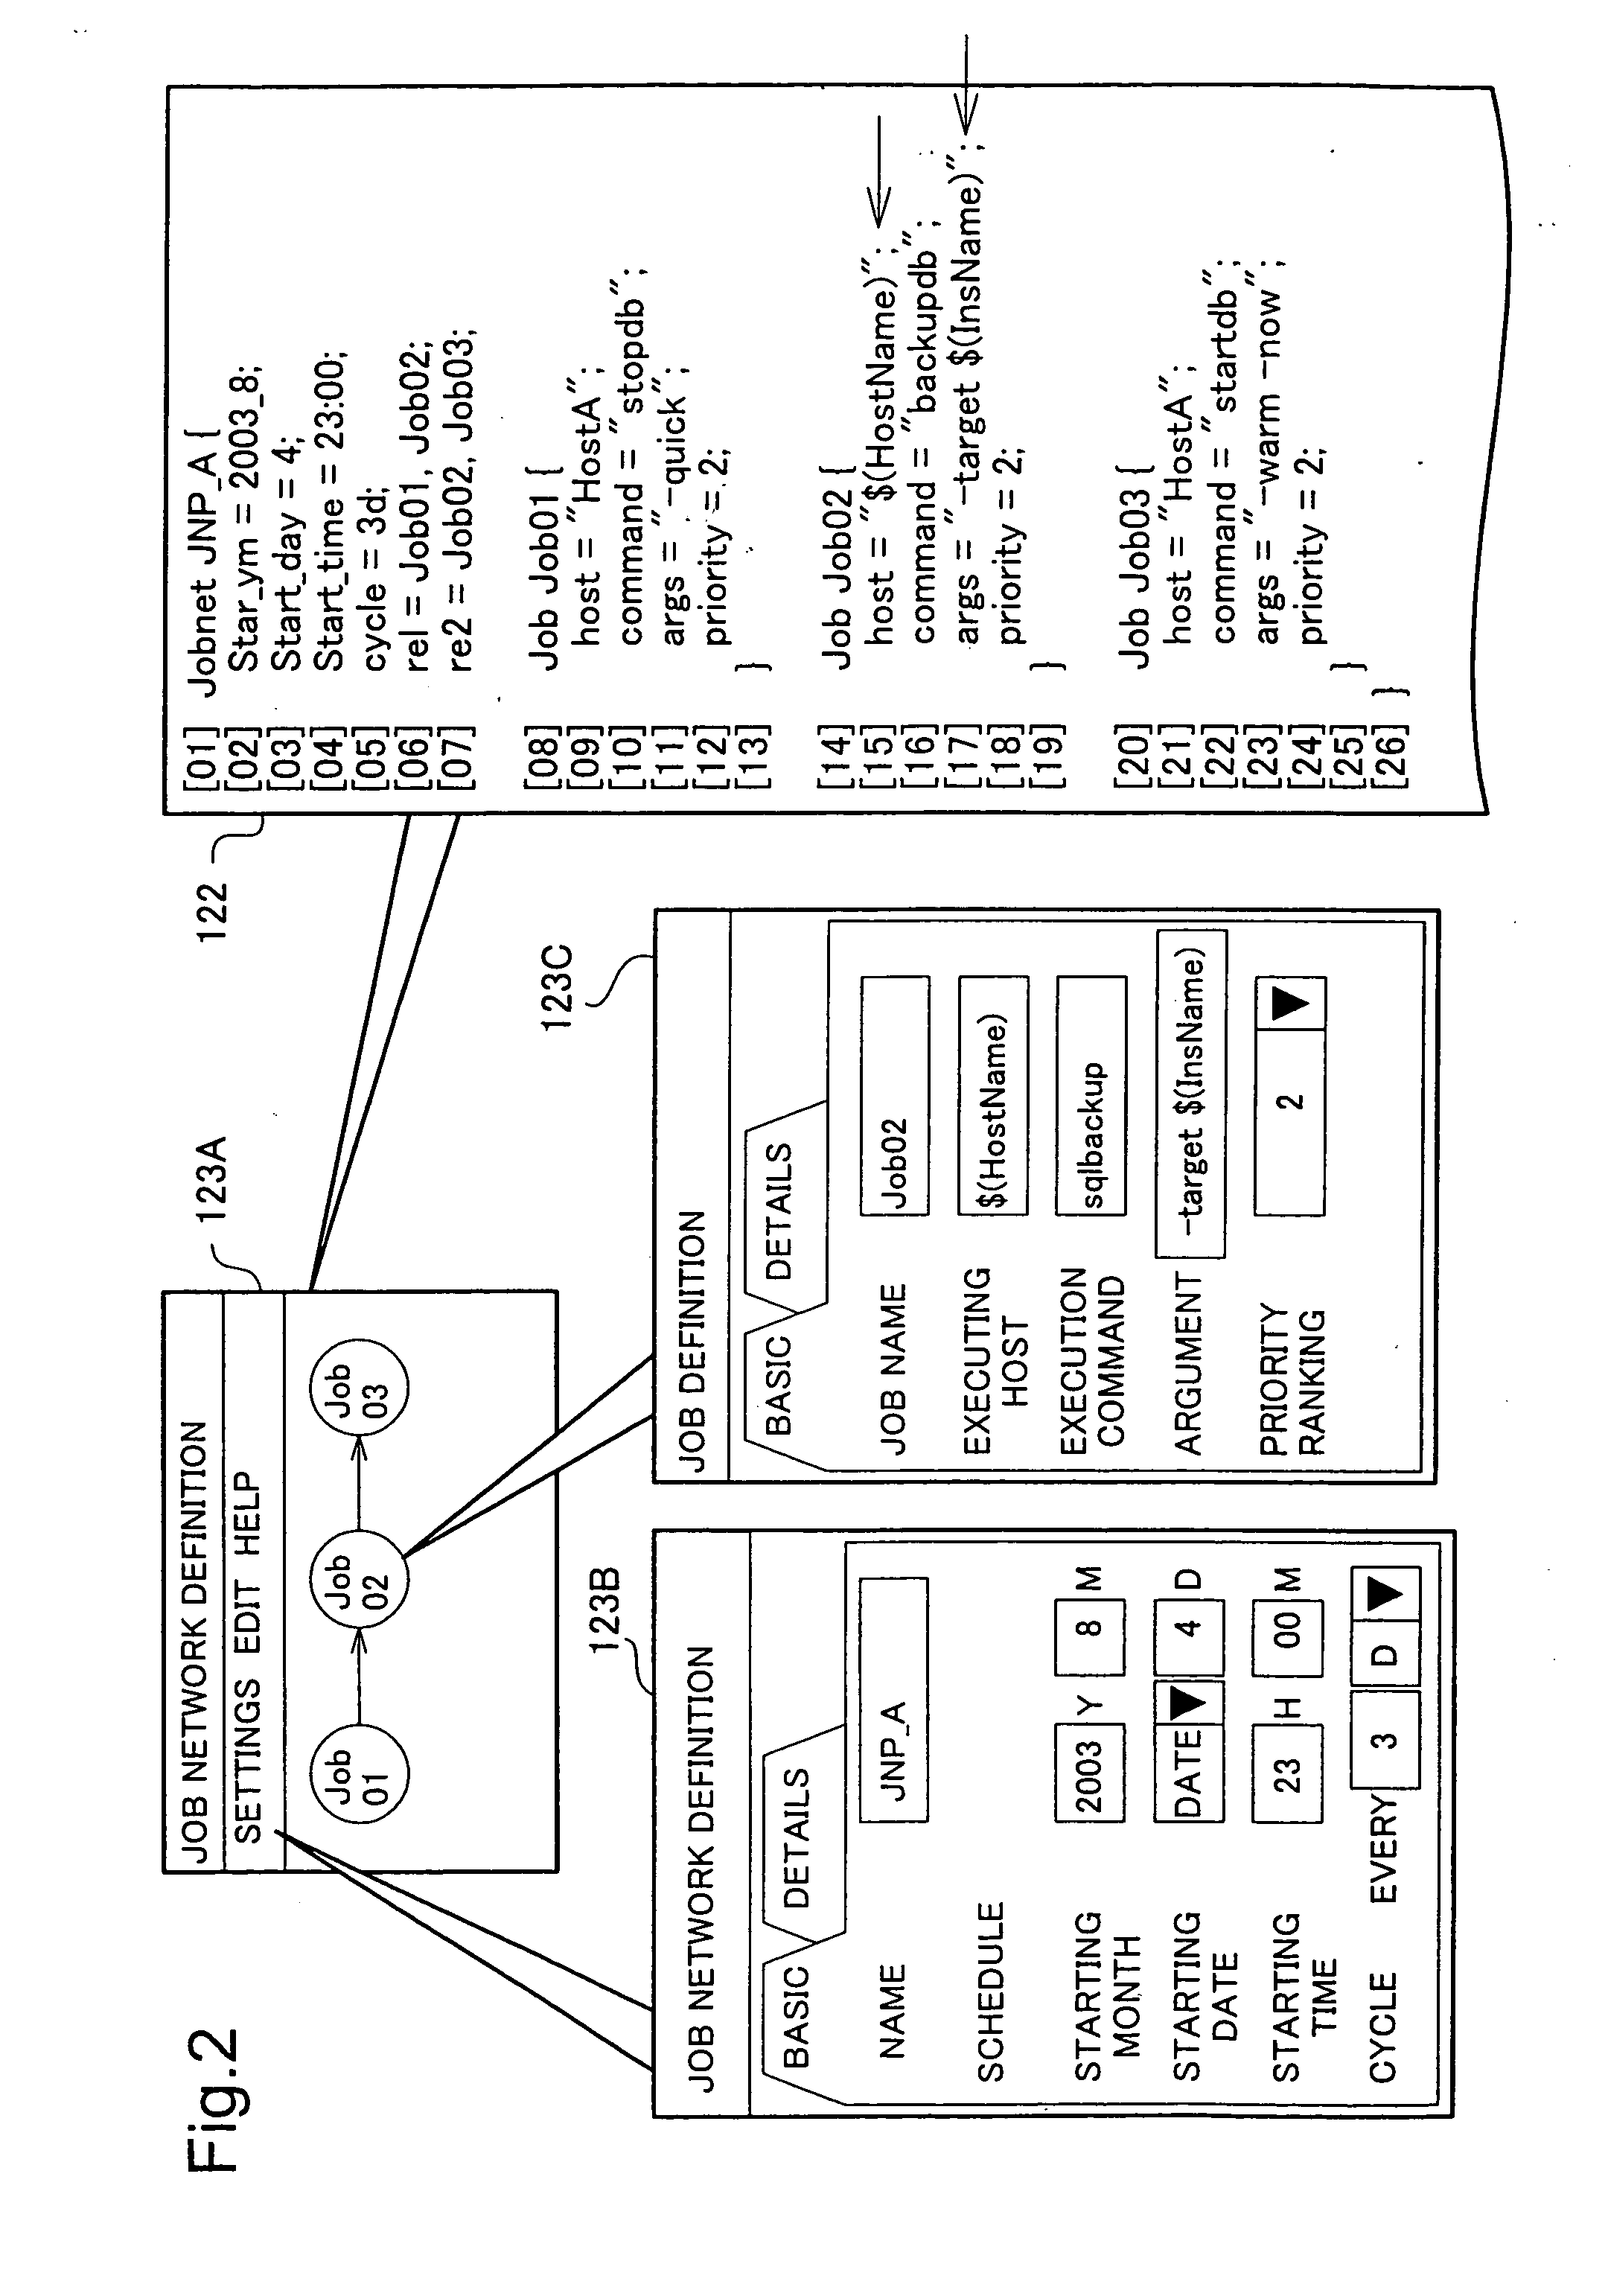 Job network configuration file creating device and creating method